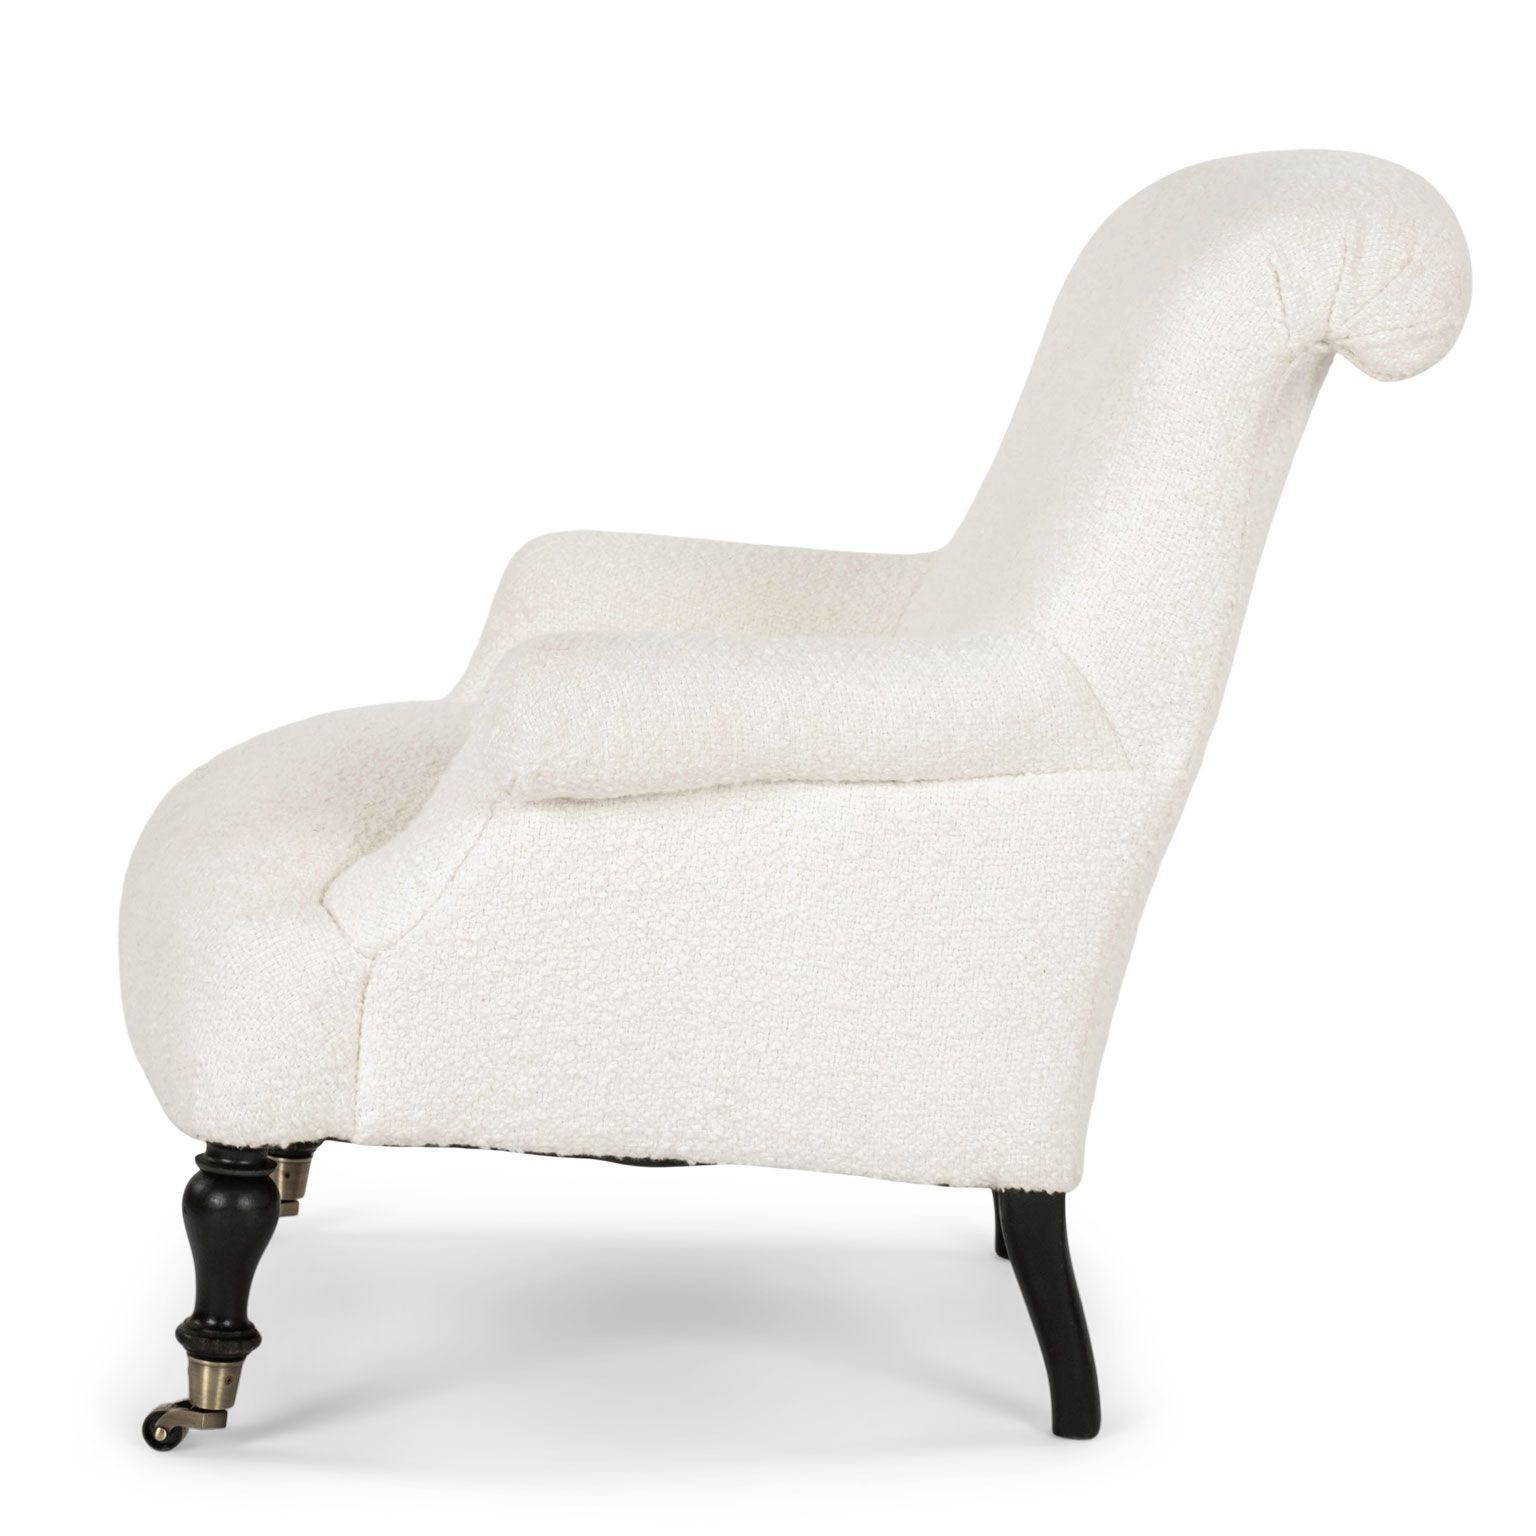 French Napoleon III Armchair upholstered in off-white boucle circa 1865-1884. New casters on front legs. An excellent near-pair with a second Napoleon III chair similarly upholstered (see last two images - and item ref: 2017).

Note: Original/early